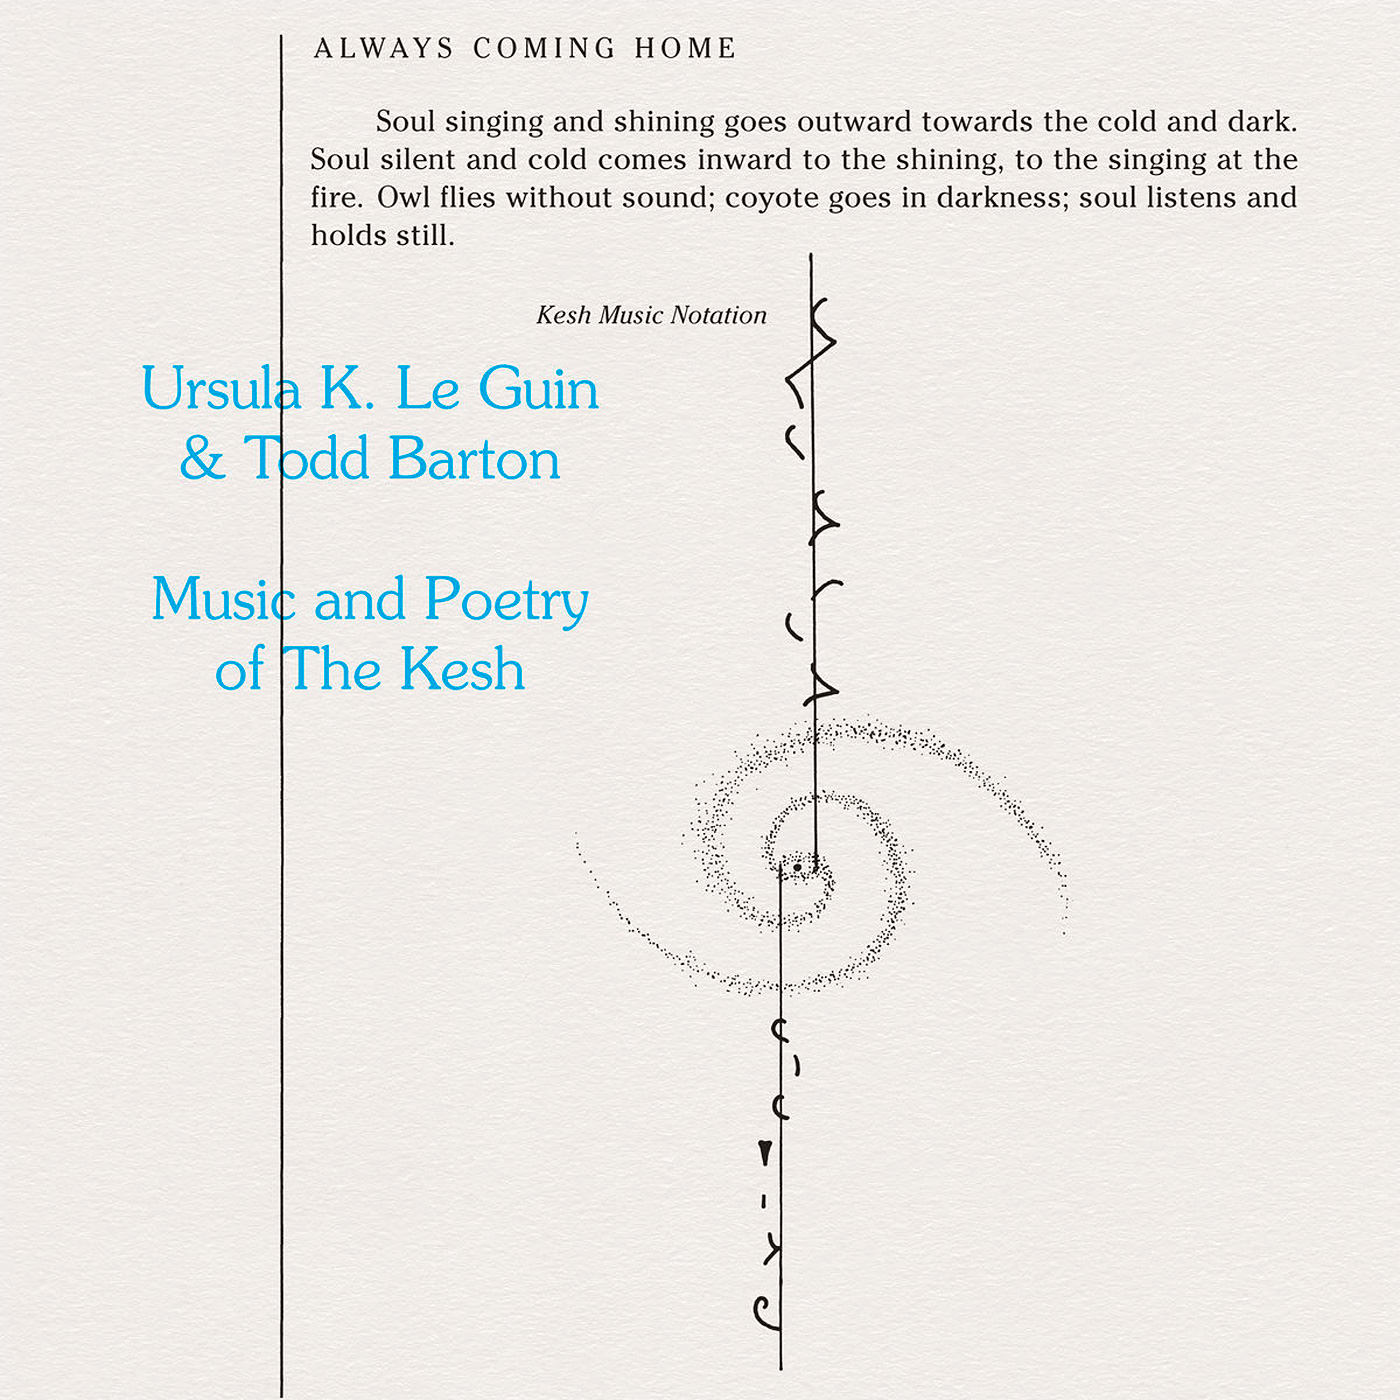 Ursula K. Le Guin & Todd Barton - Music And Poetry Of The Kesh (1985/2018) [Qobuz FLAC 24bit/44,1kHz]